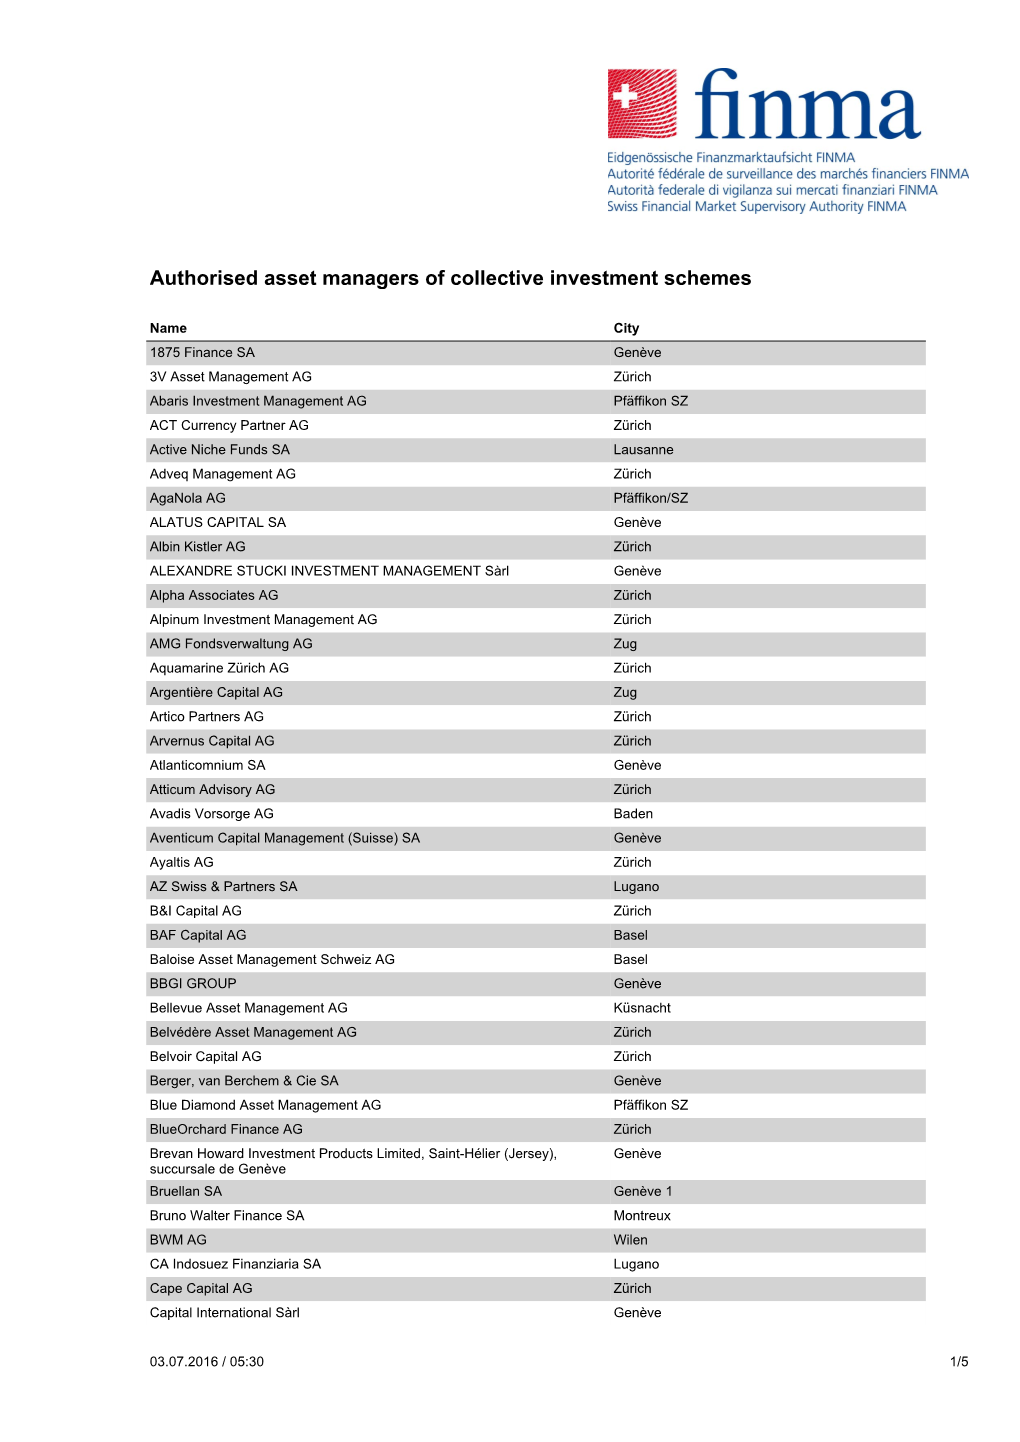 Authorised Asset Managers of Collective Investment Schemes